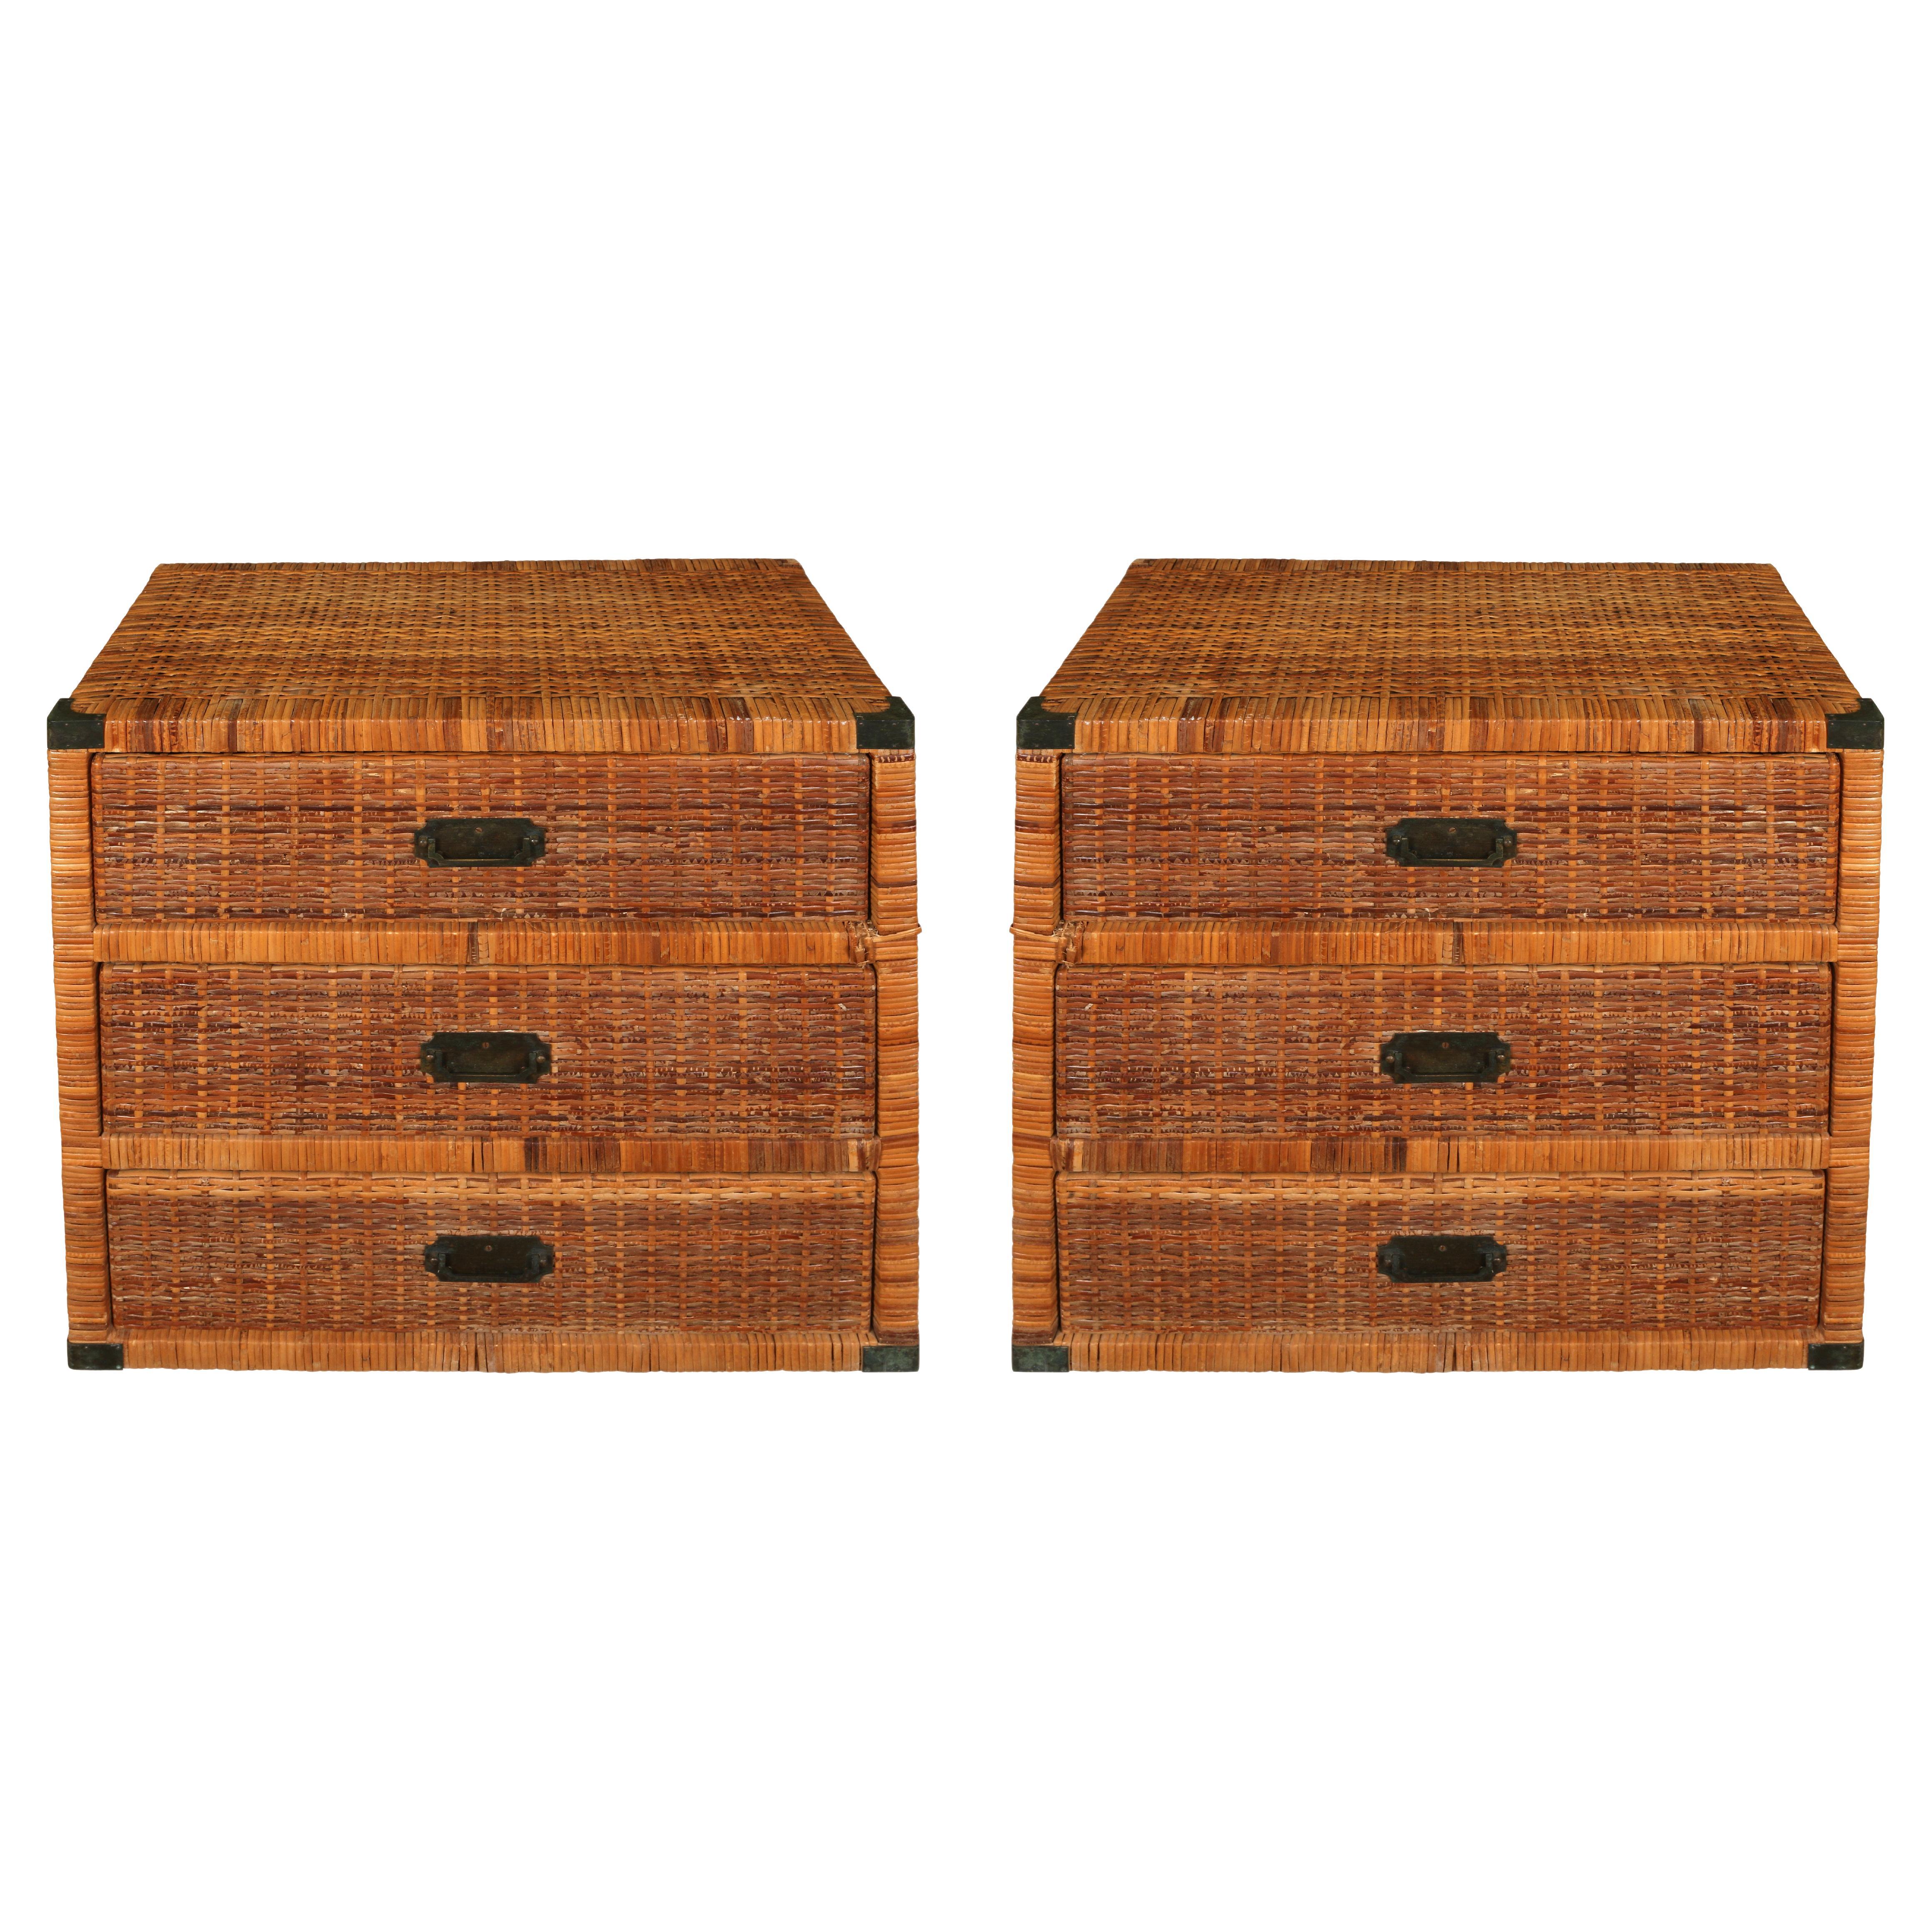 Pair of Rattan Chests